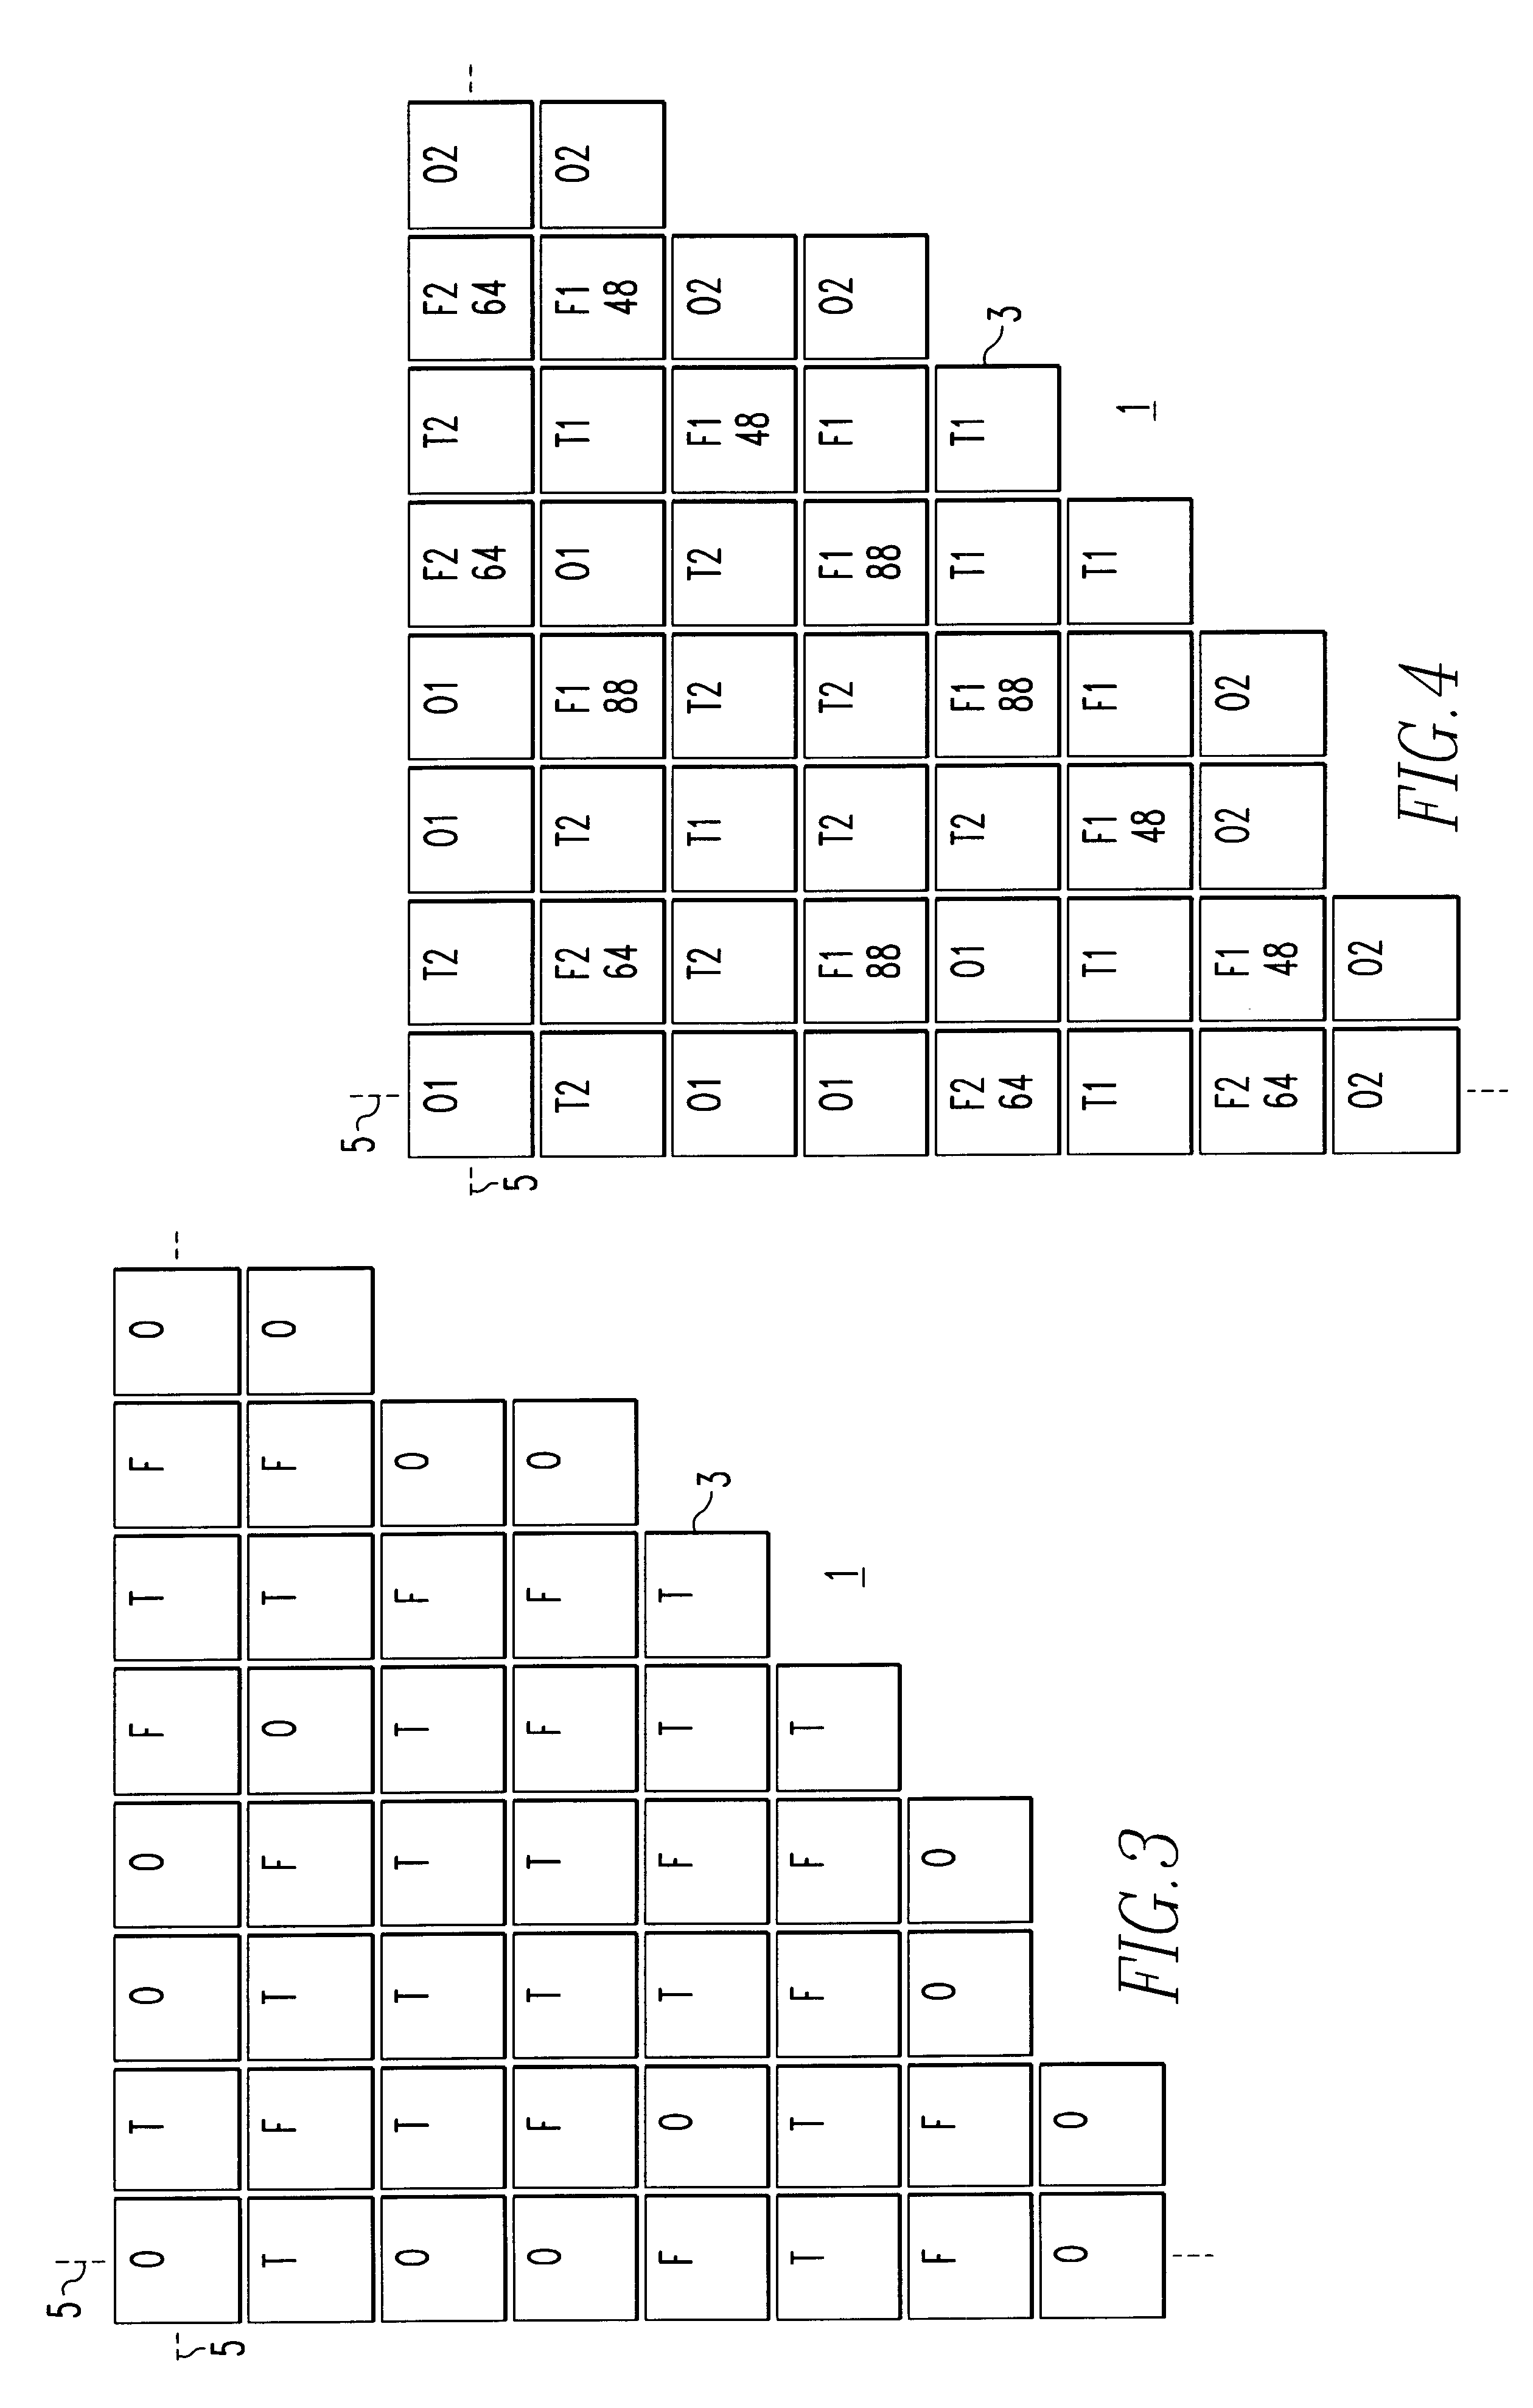 Method of establishing a nuclear reactor core fuel assembly loading pattern